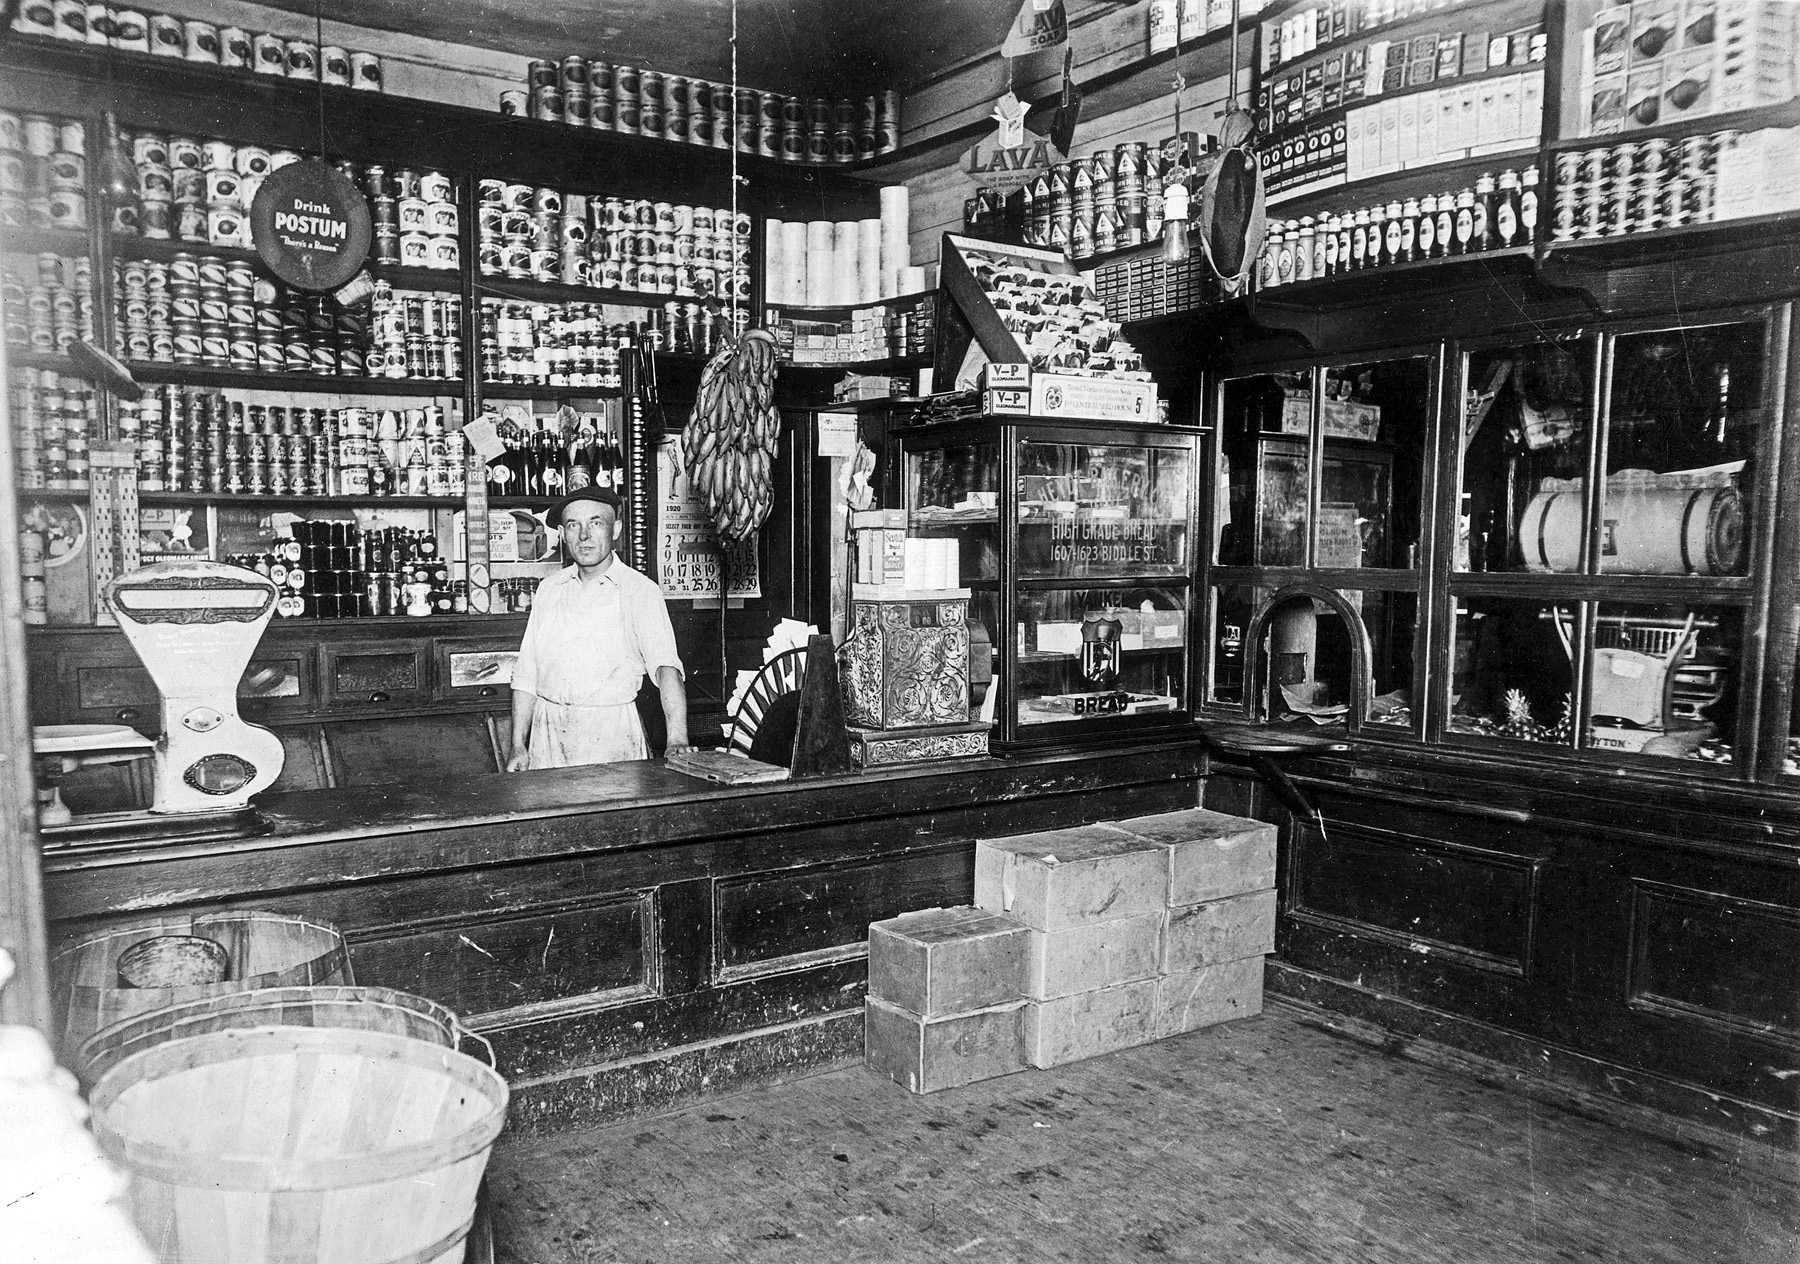 My grandparents' grocery store at 8th and Winstanley Avenue in East St. Louis, Illinois.  That intersection and neighborhood is no longer on the map having been swept away by the Interstate highway. An unnamed employee is pictured behind the counter. The store has been rearranged since the 1914 picture seen here and now has a bunch of "fresh" bananas hanging from a hook. There are no notations on the back side of the 5" X 7" print. Short sleeves and the brown spotted bananas would suggest warm weather. View full size.